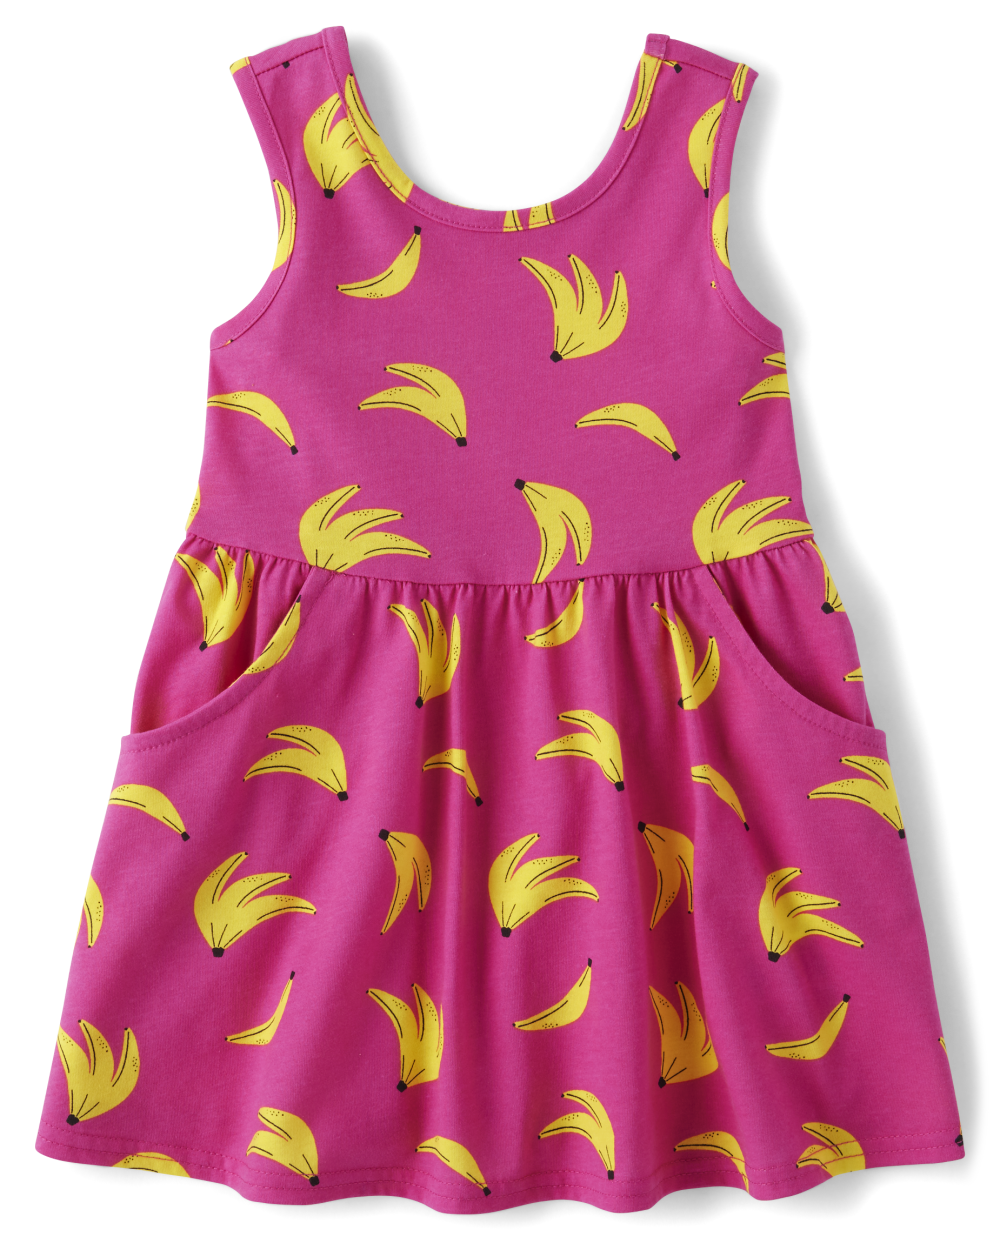 Toddler Baby General Print Sleeveless Tank Above the Knee Pocketed Scoop Neck Dress